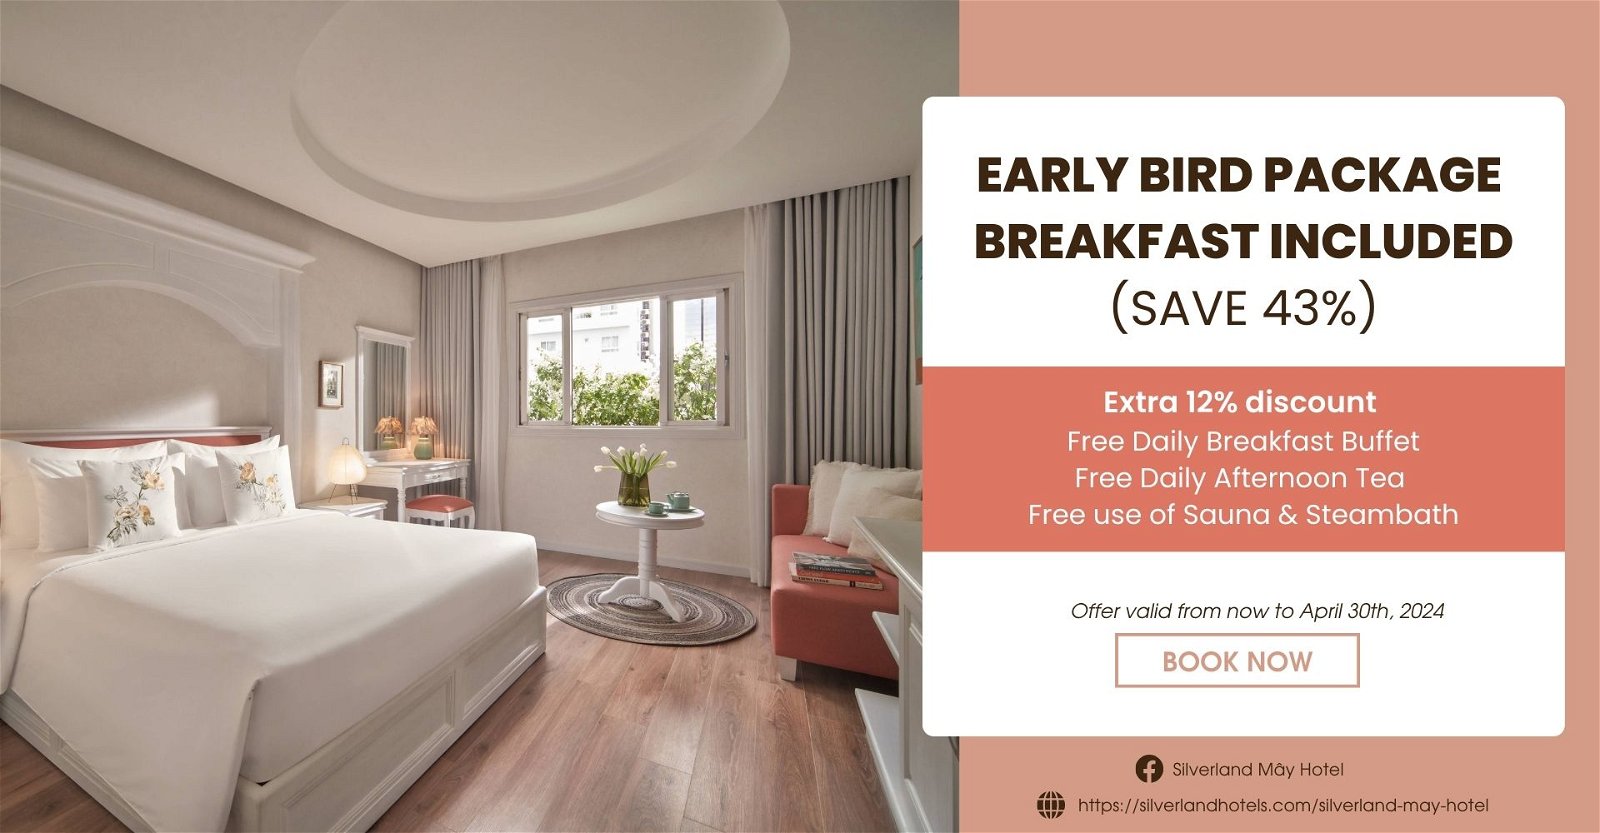 SILVERLAND MÂY – EARLY BIRD PACKAGE BREAKFAST INCLUDED (SAVE 43%)